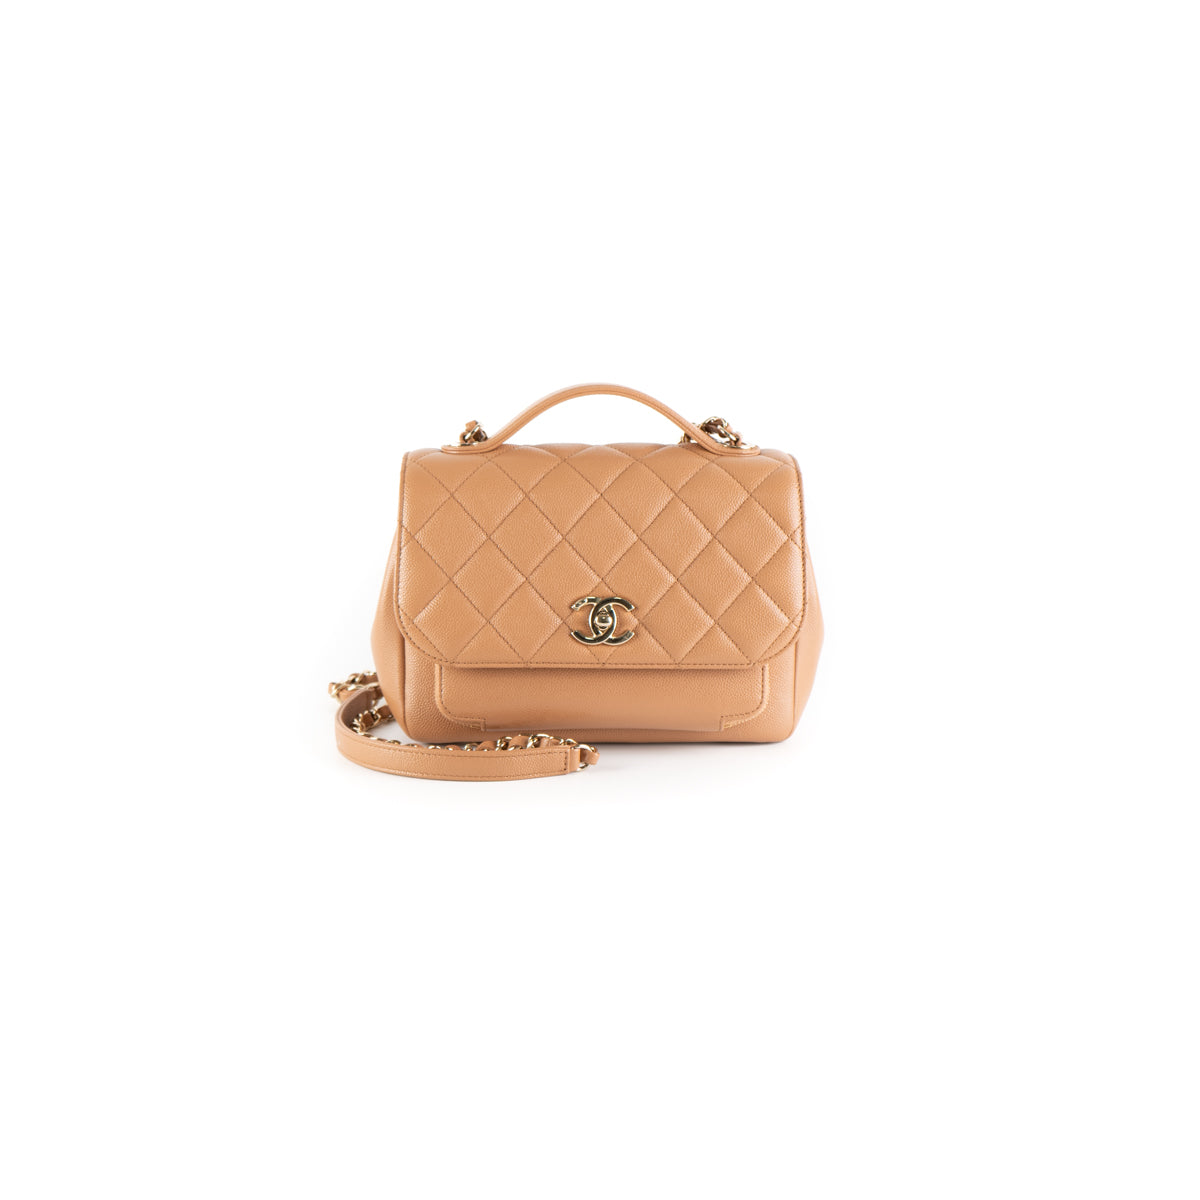 The Global Luxury Closet - Chanel 21P Caramel Caviar LGHW Business Affinity  size Medium Comes with box, dust bag, authenticity card and authentication  certificate In kept unused condition £3750 + shipping fee